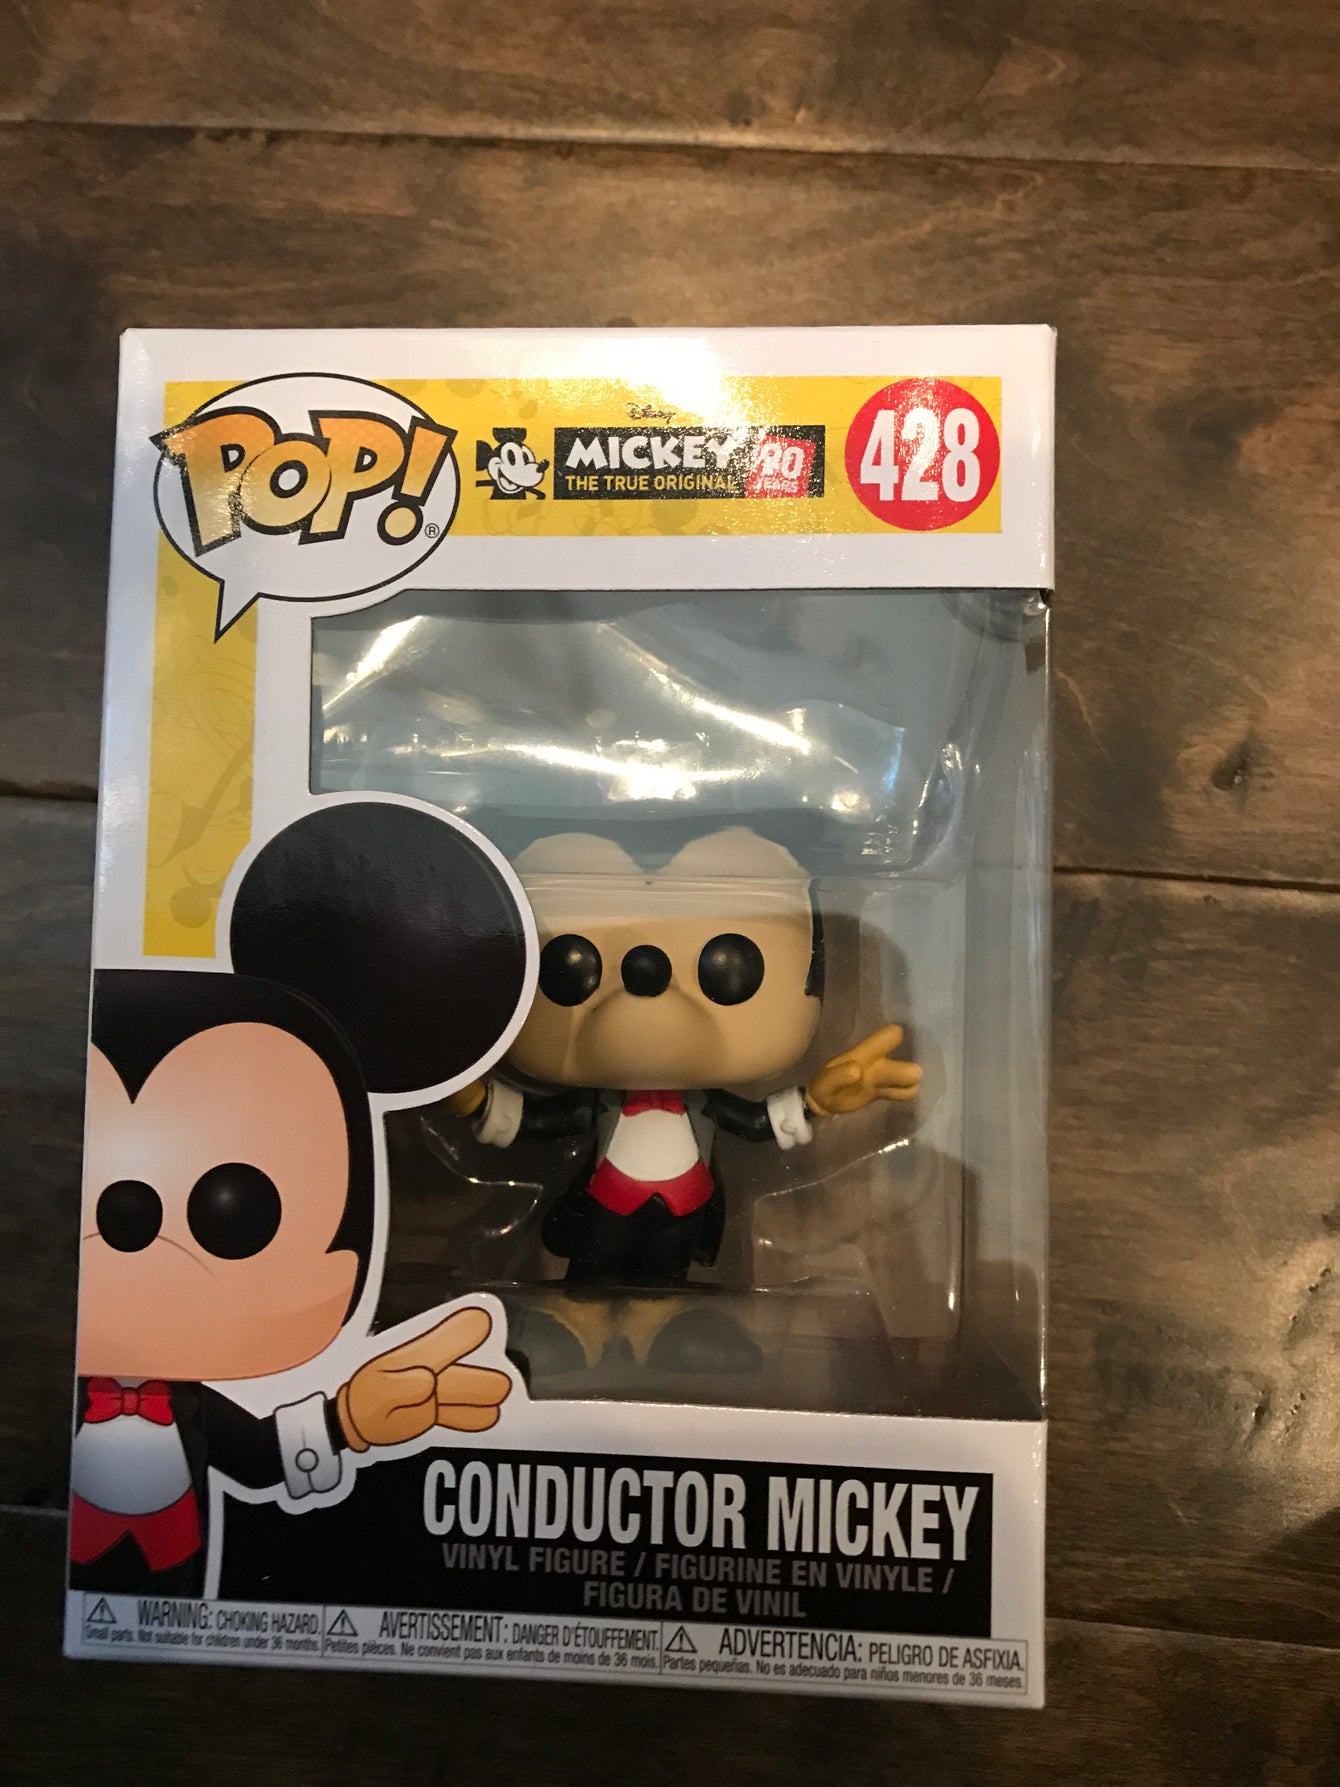 Conductor Mickey mint condition LC4